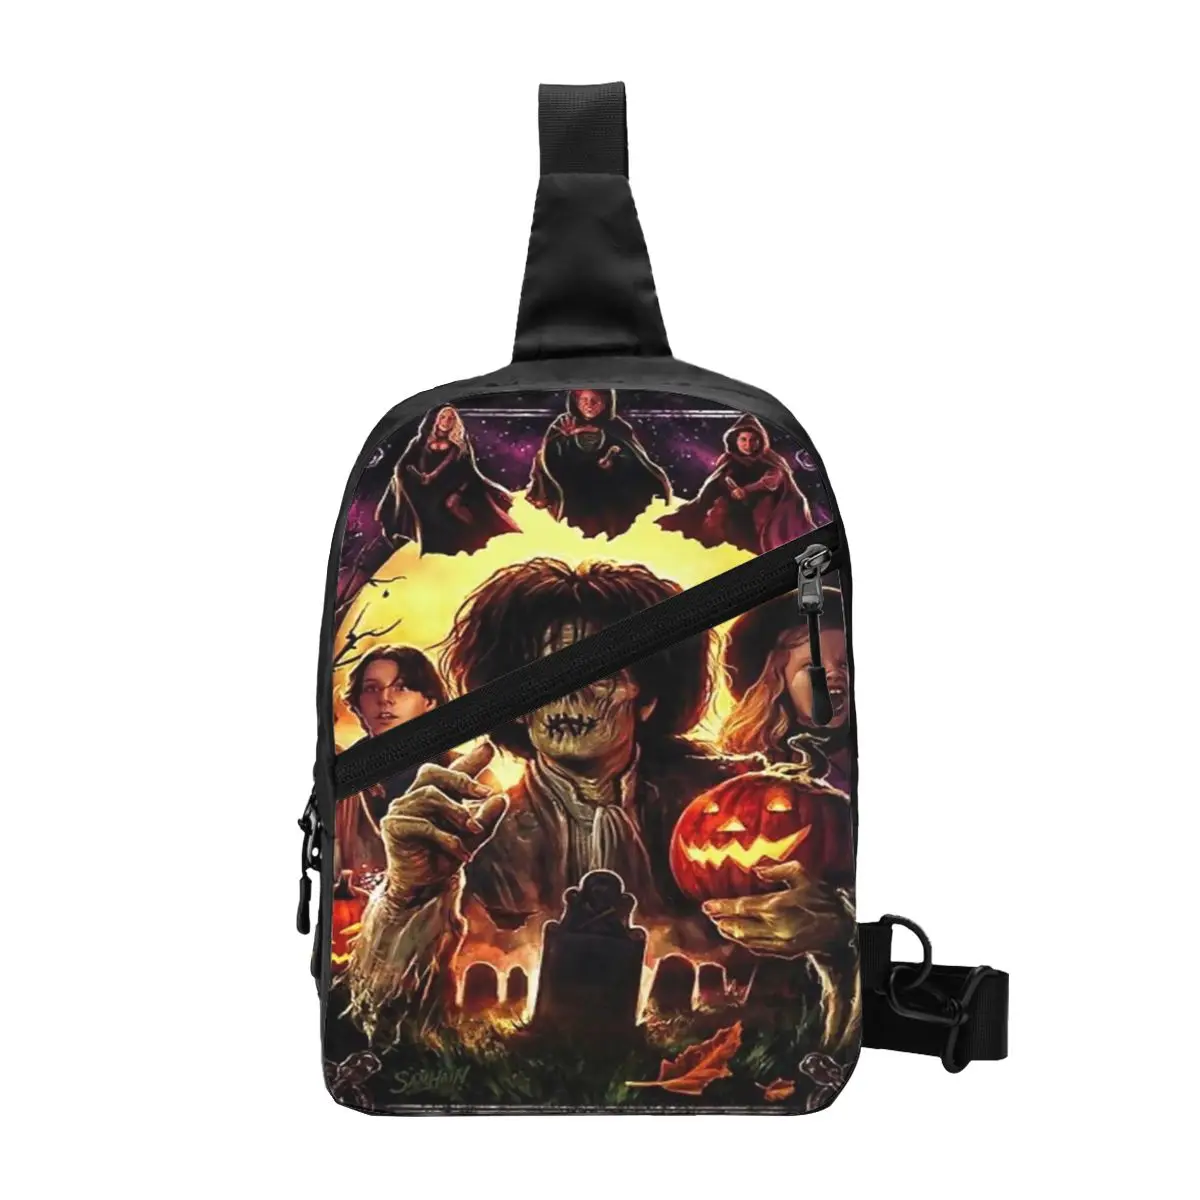 Hocus Halloween Night Pocus Sling Chest Crossbody Bag Men Casual Witchcraft Cat Shoulder Backpack for Hiking